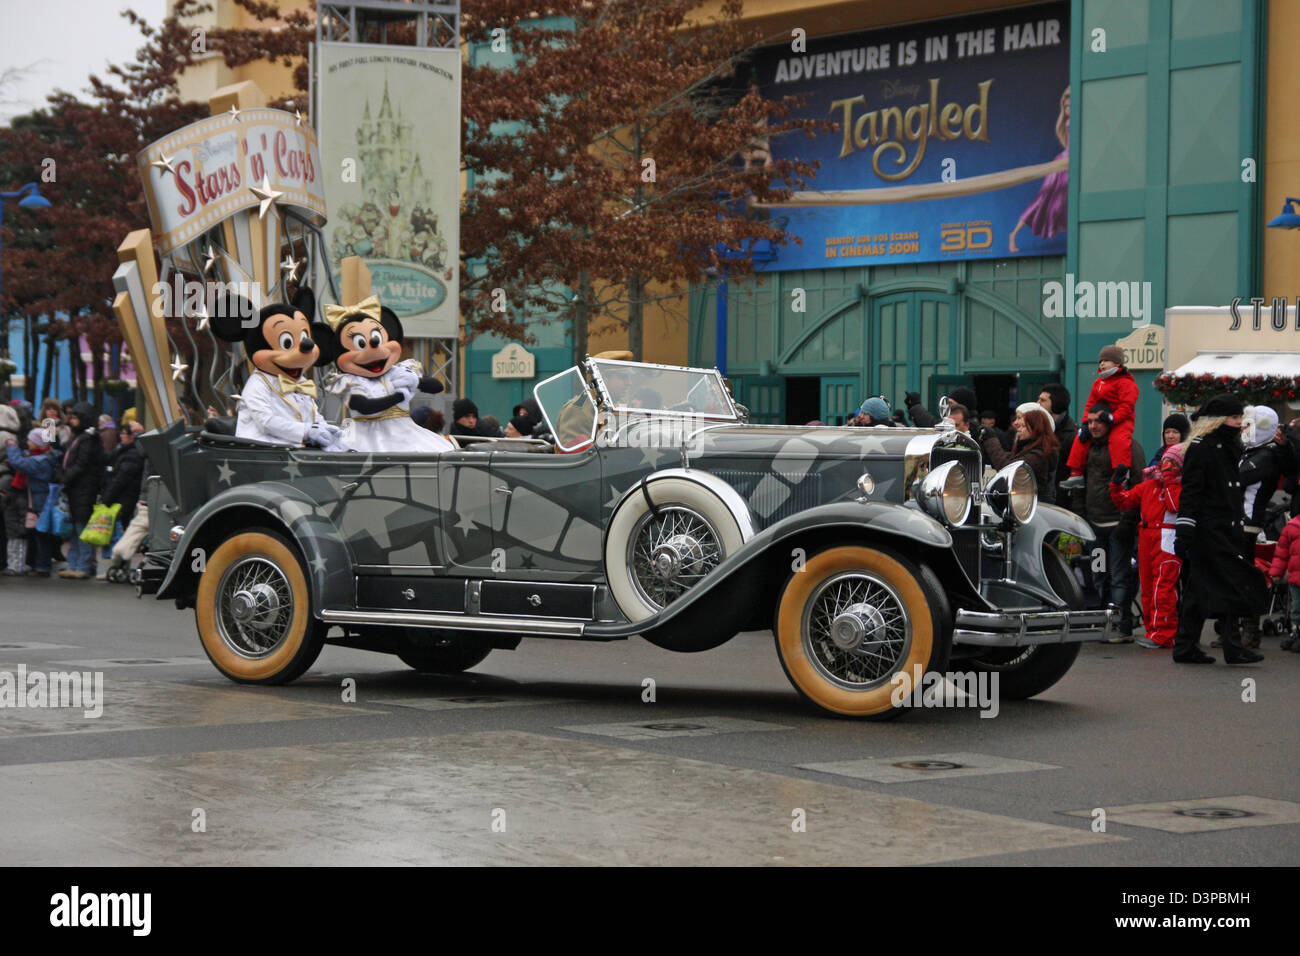 Mickey and Minnie mouse in the back of a car during a parade in winter at Walt Disney Studios Park, Disneyland Paris. Stock Photo